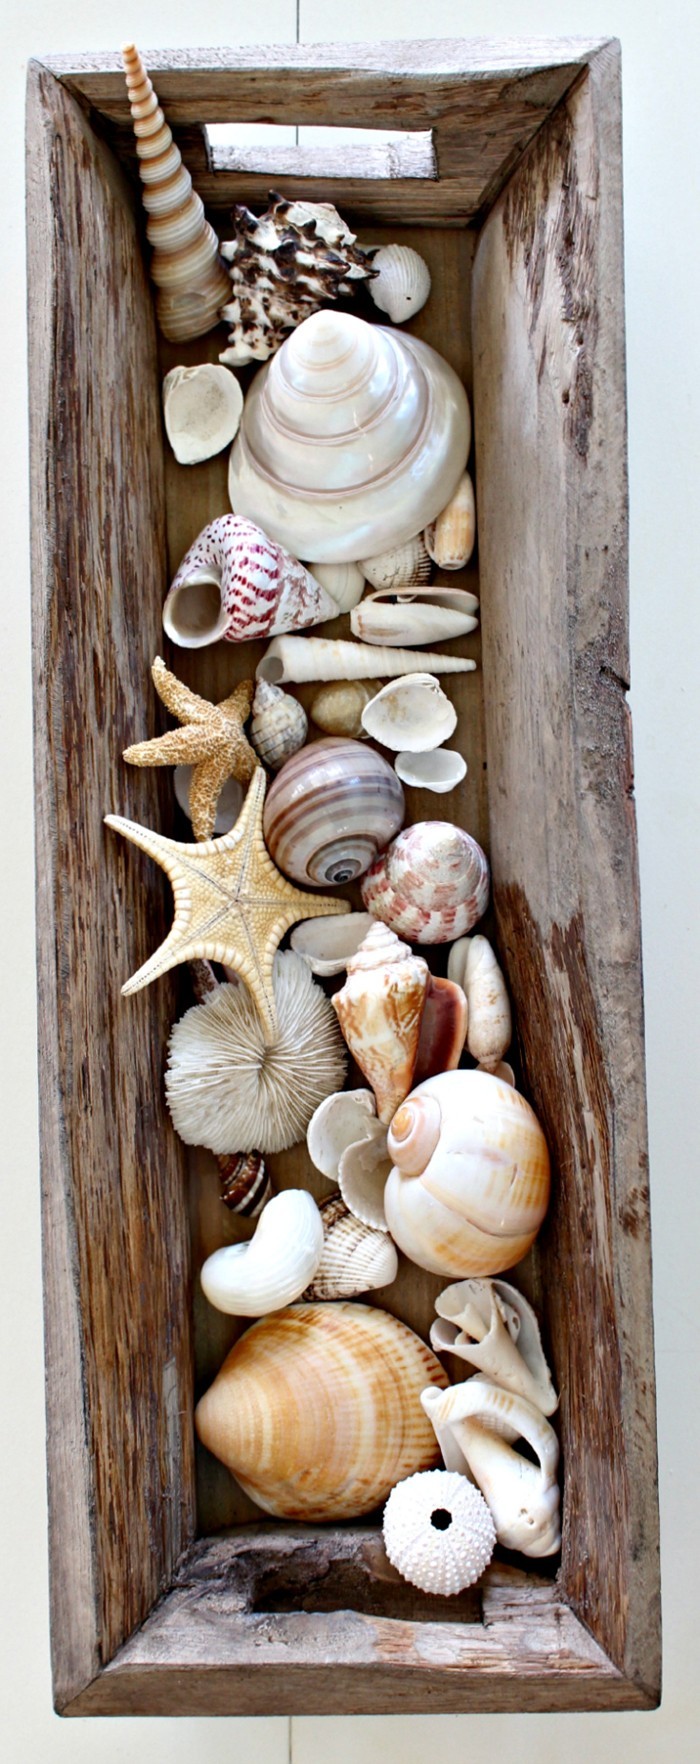 1652599021 970 30 DIY ideas for crafts with seashells from summer vacation - 30 DIY ideas for crafts with seashells from summer vacation